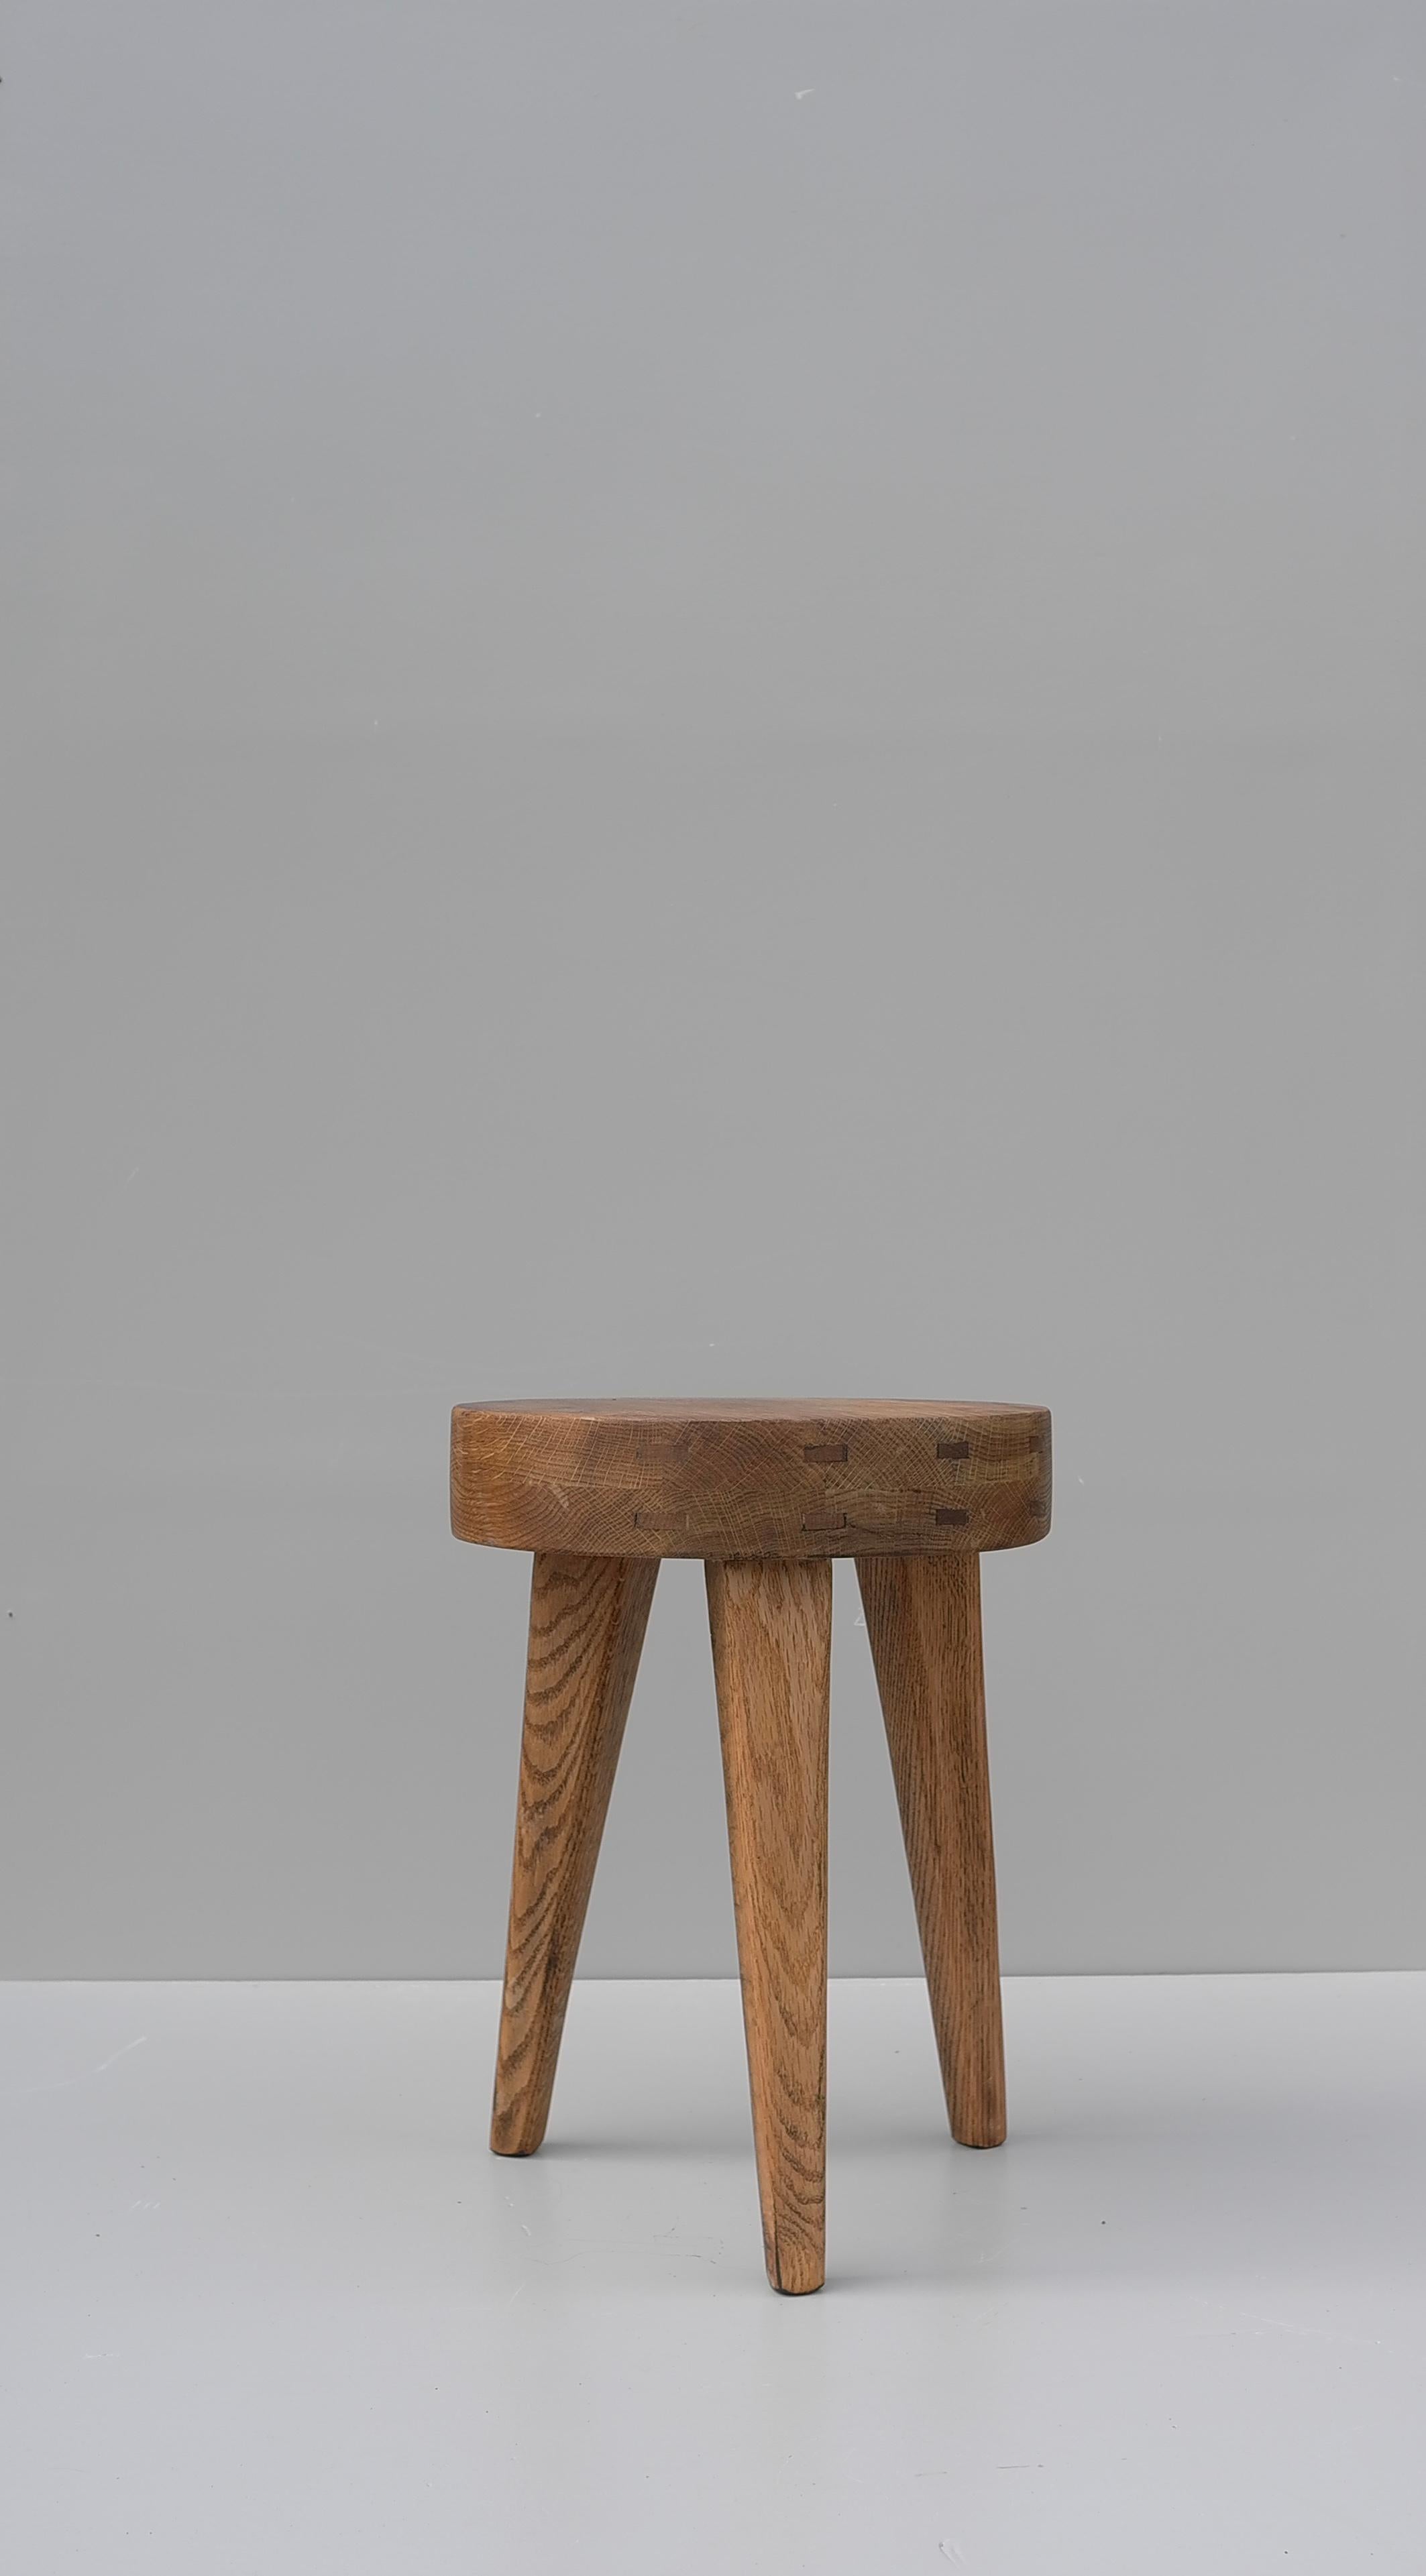 Solid Oak Mid-Century Modern Craftsman Stool, France 1960's In Good Condition For Sale In Den Haag, NL